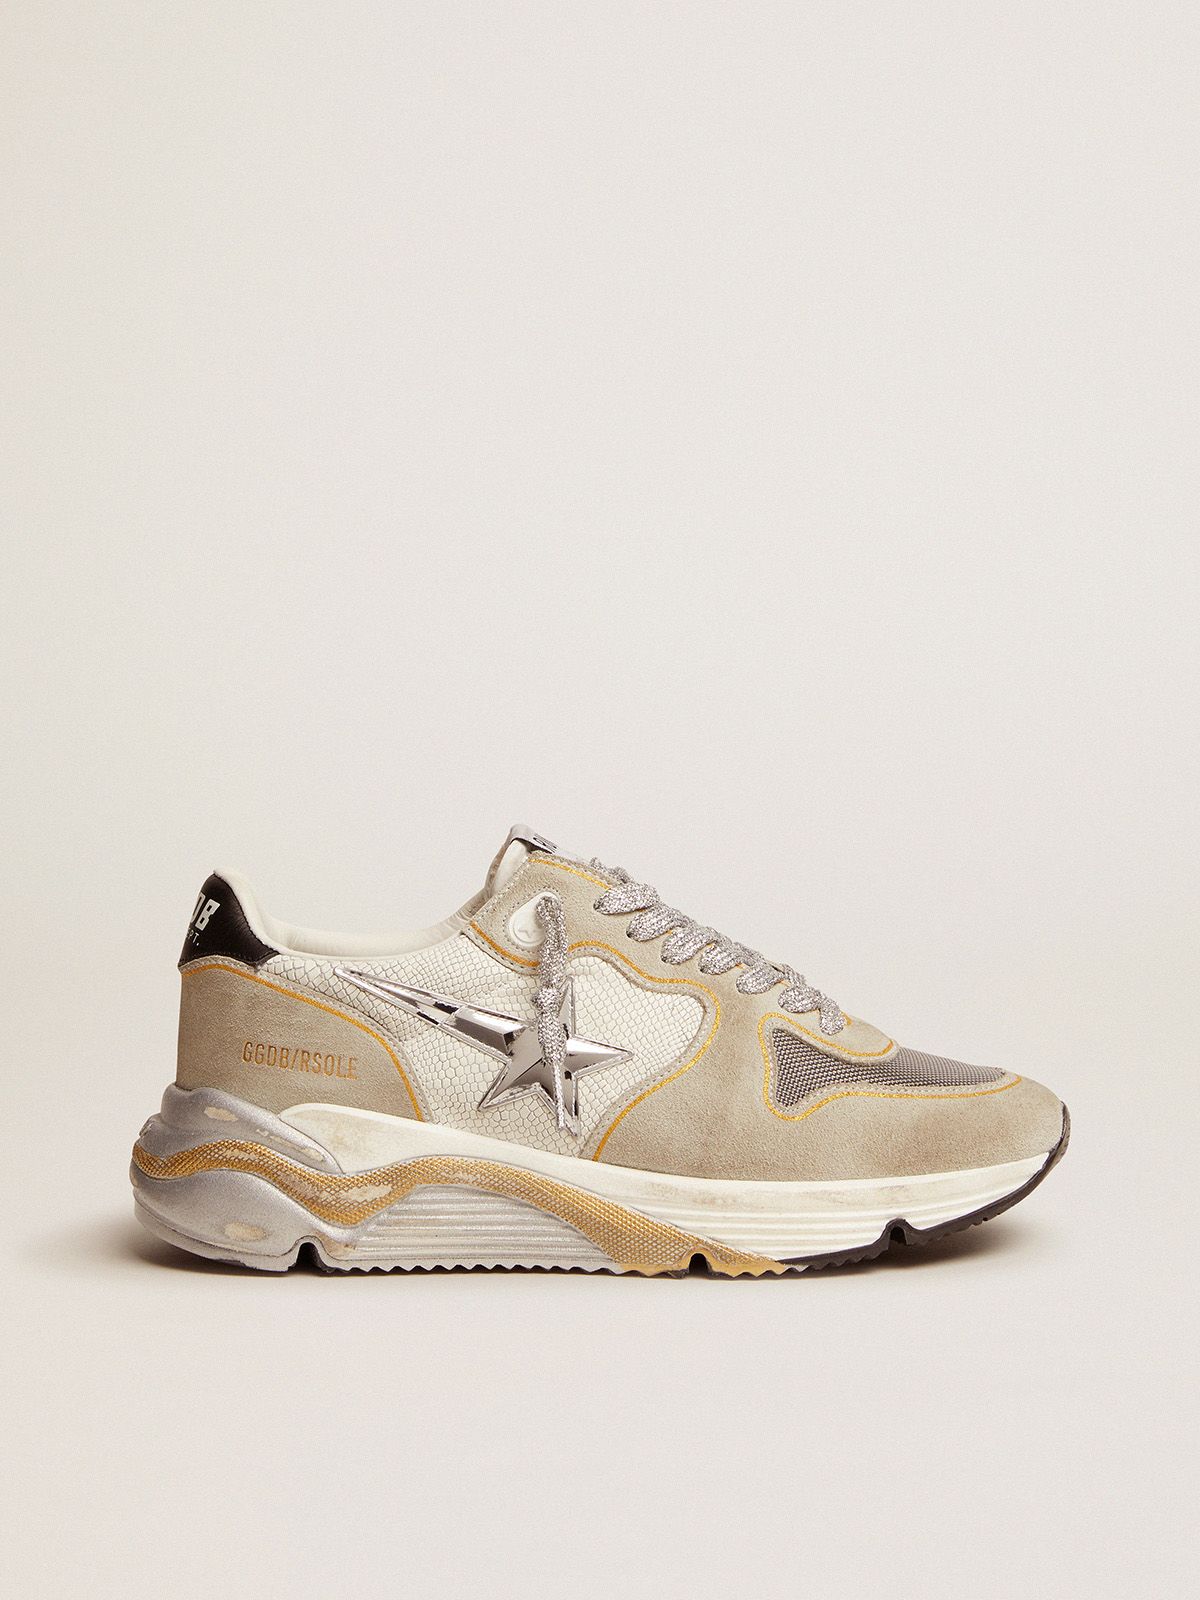 Running Sole LTD sneakers in white snake-print leather and suede with mesh insert